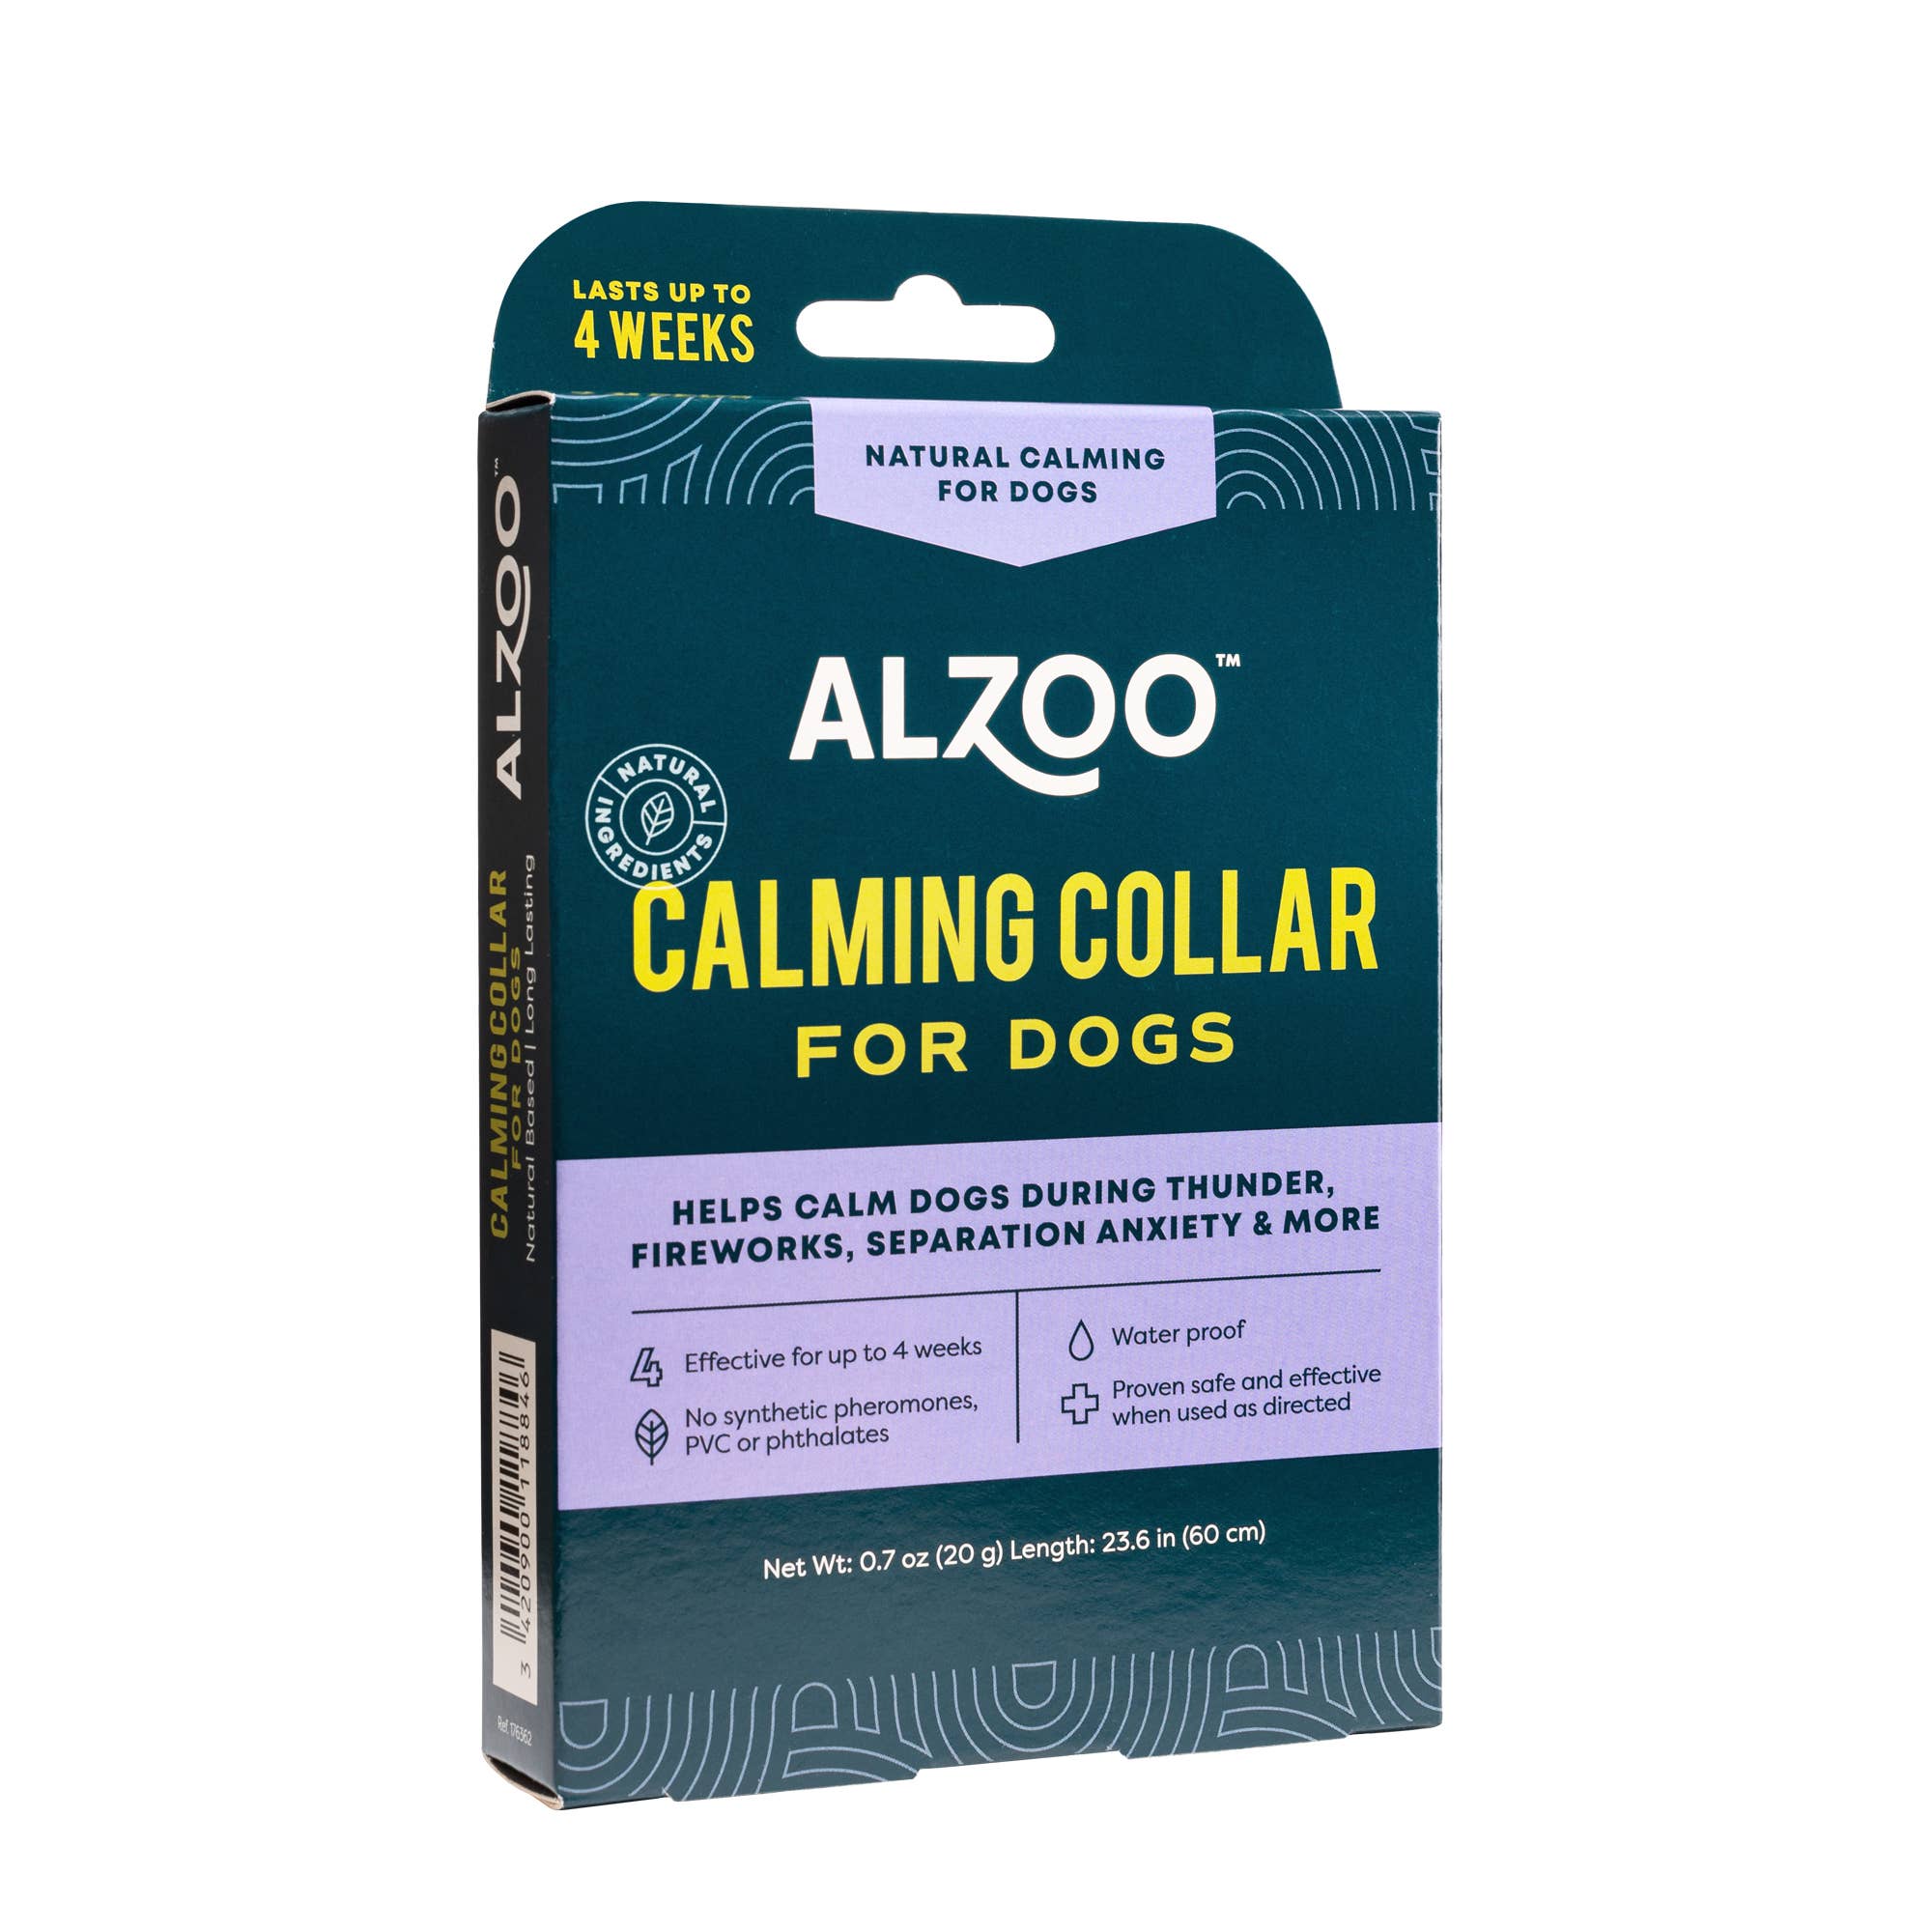 ALZOO™ Plant-Based Calming Collar for Dogs